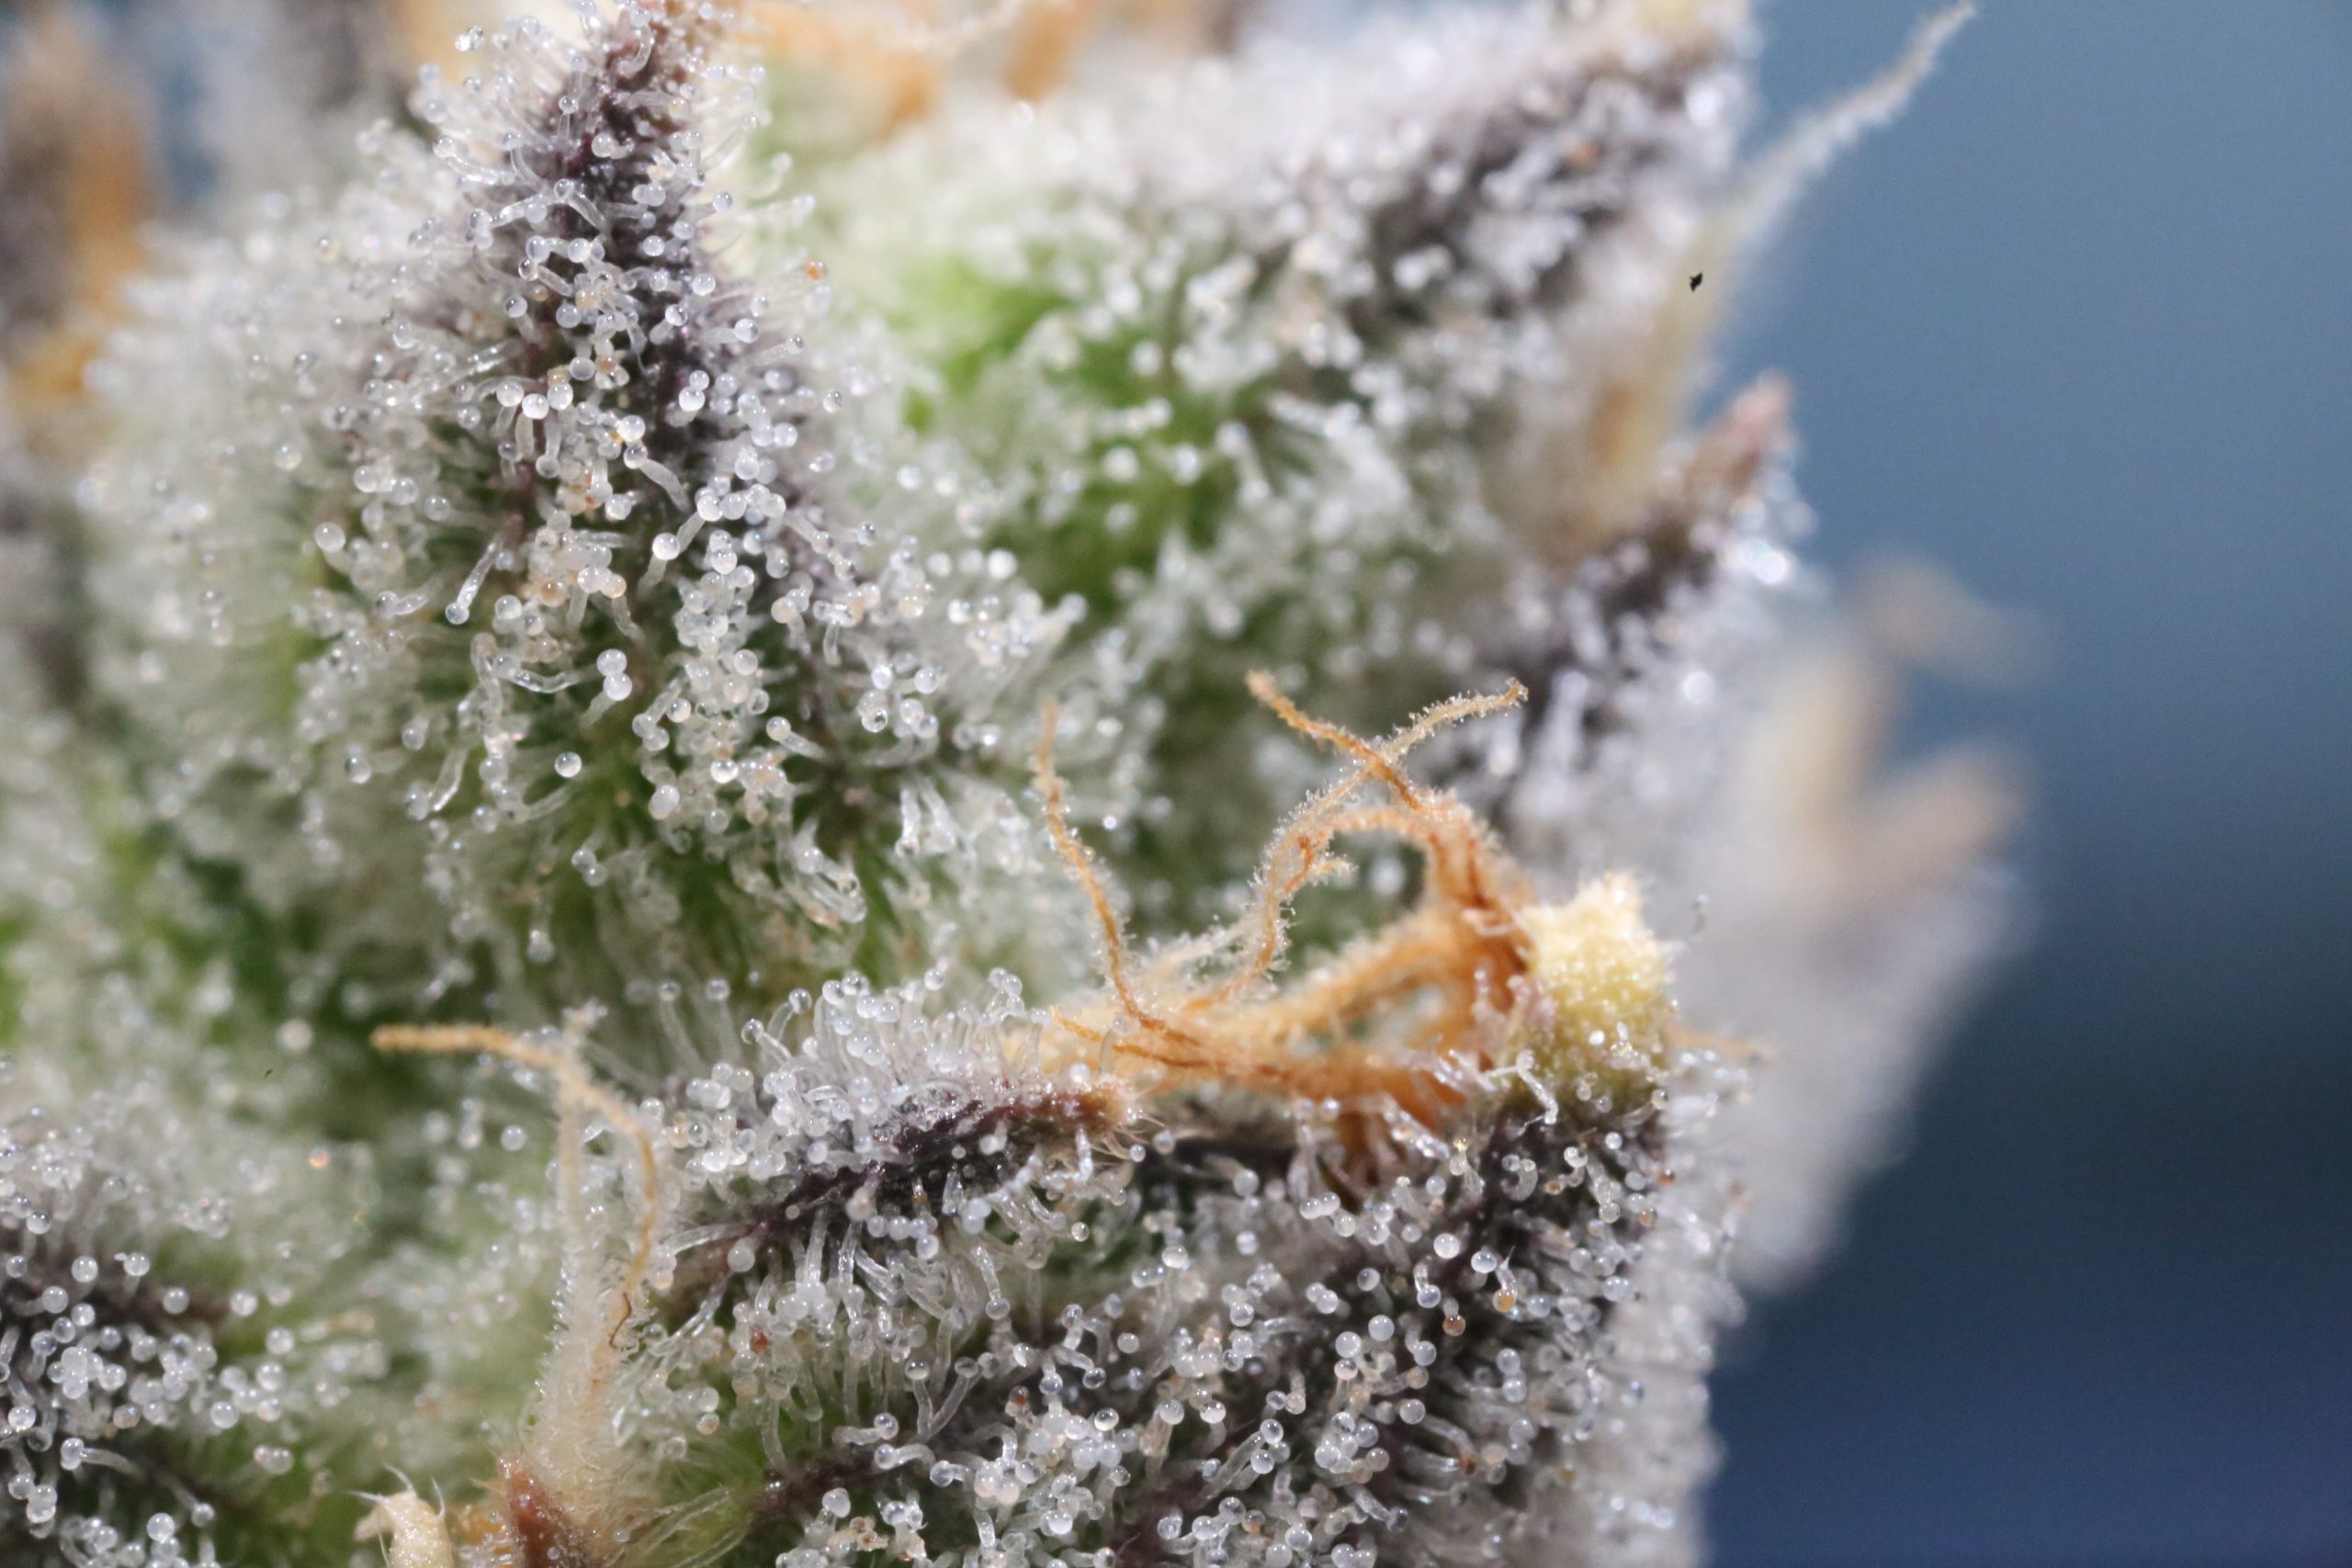 macro photo of cannabis flower with lots of trichomes to accompany the terpene guide blog for Queen City NJ